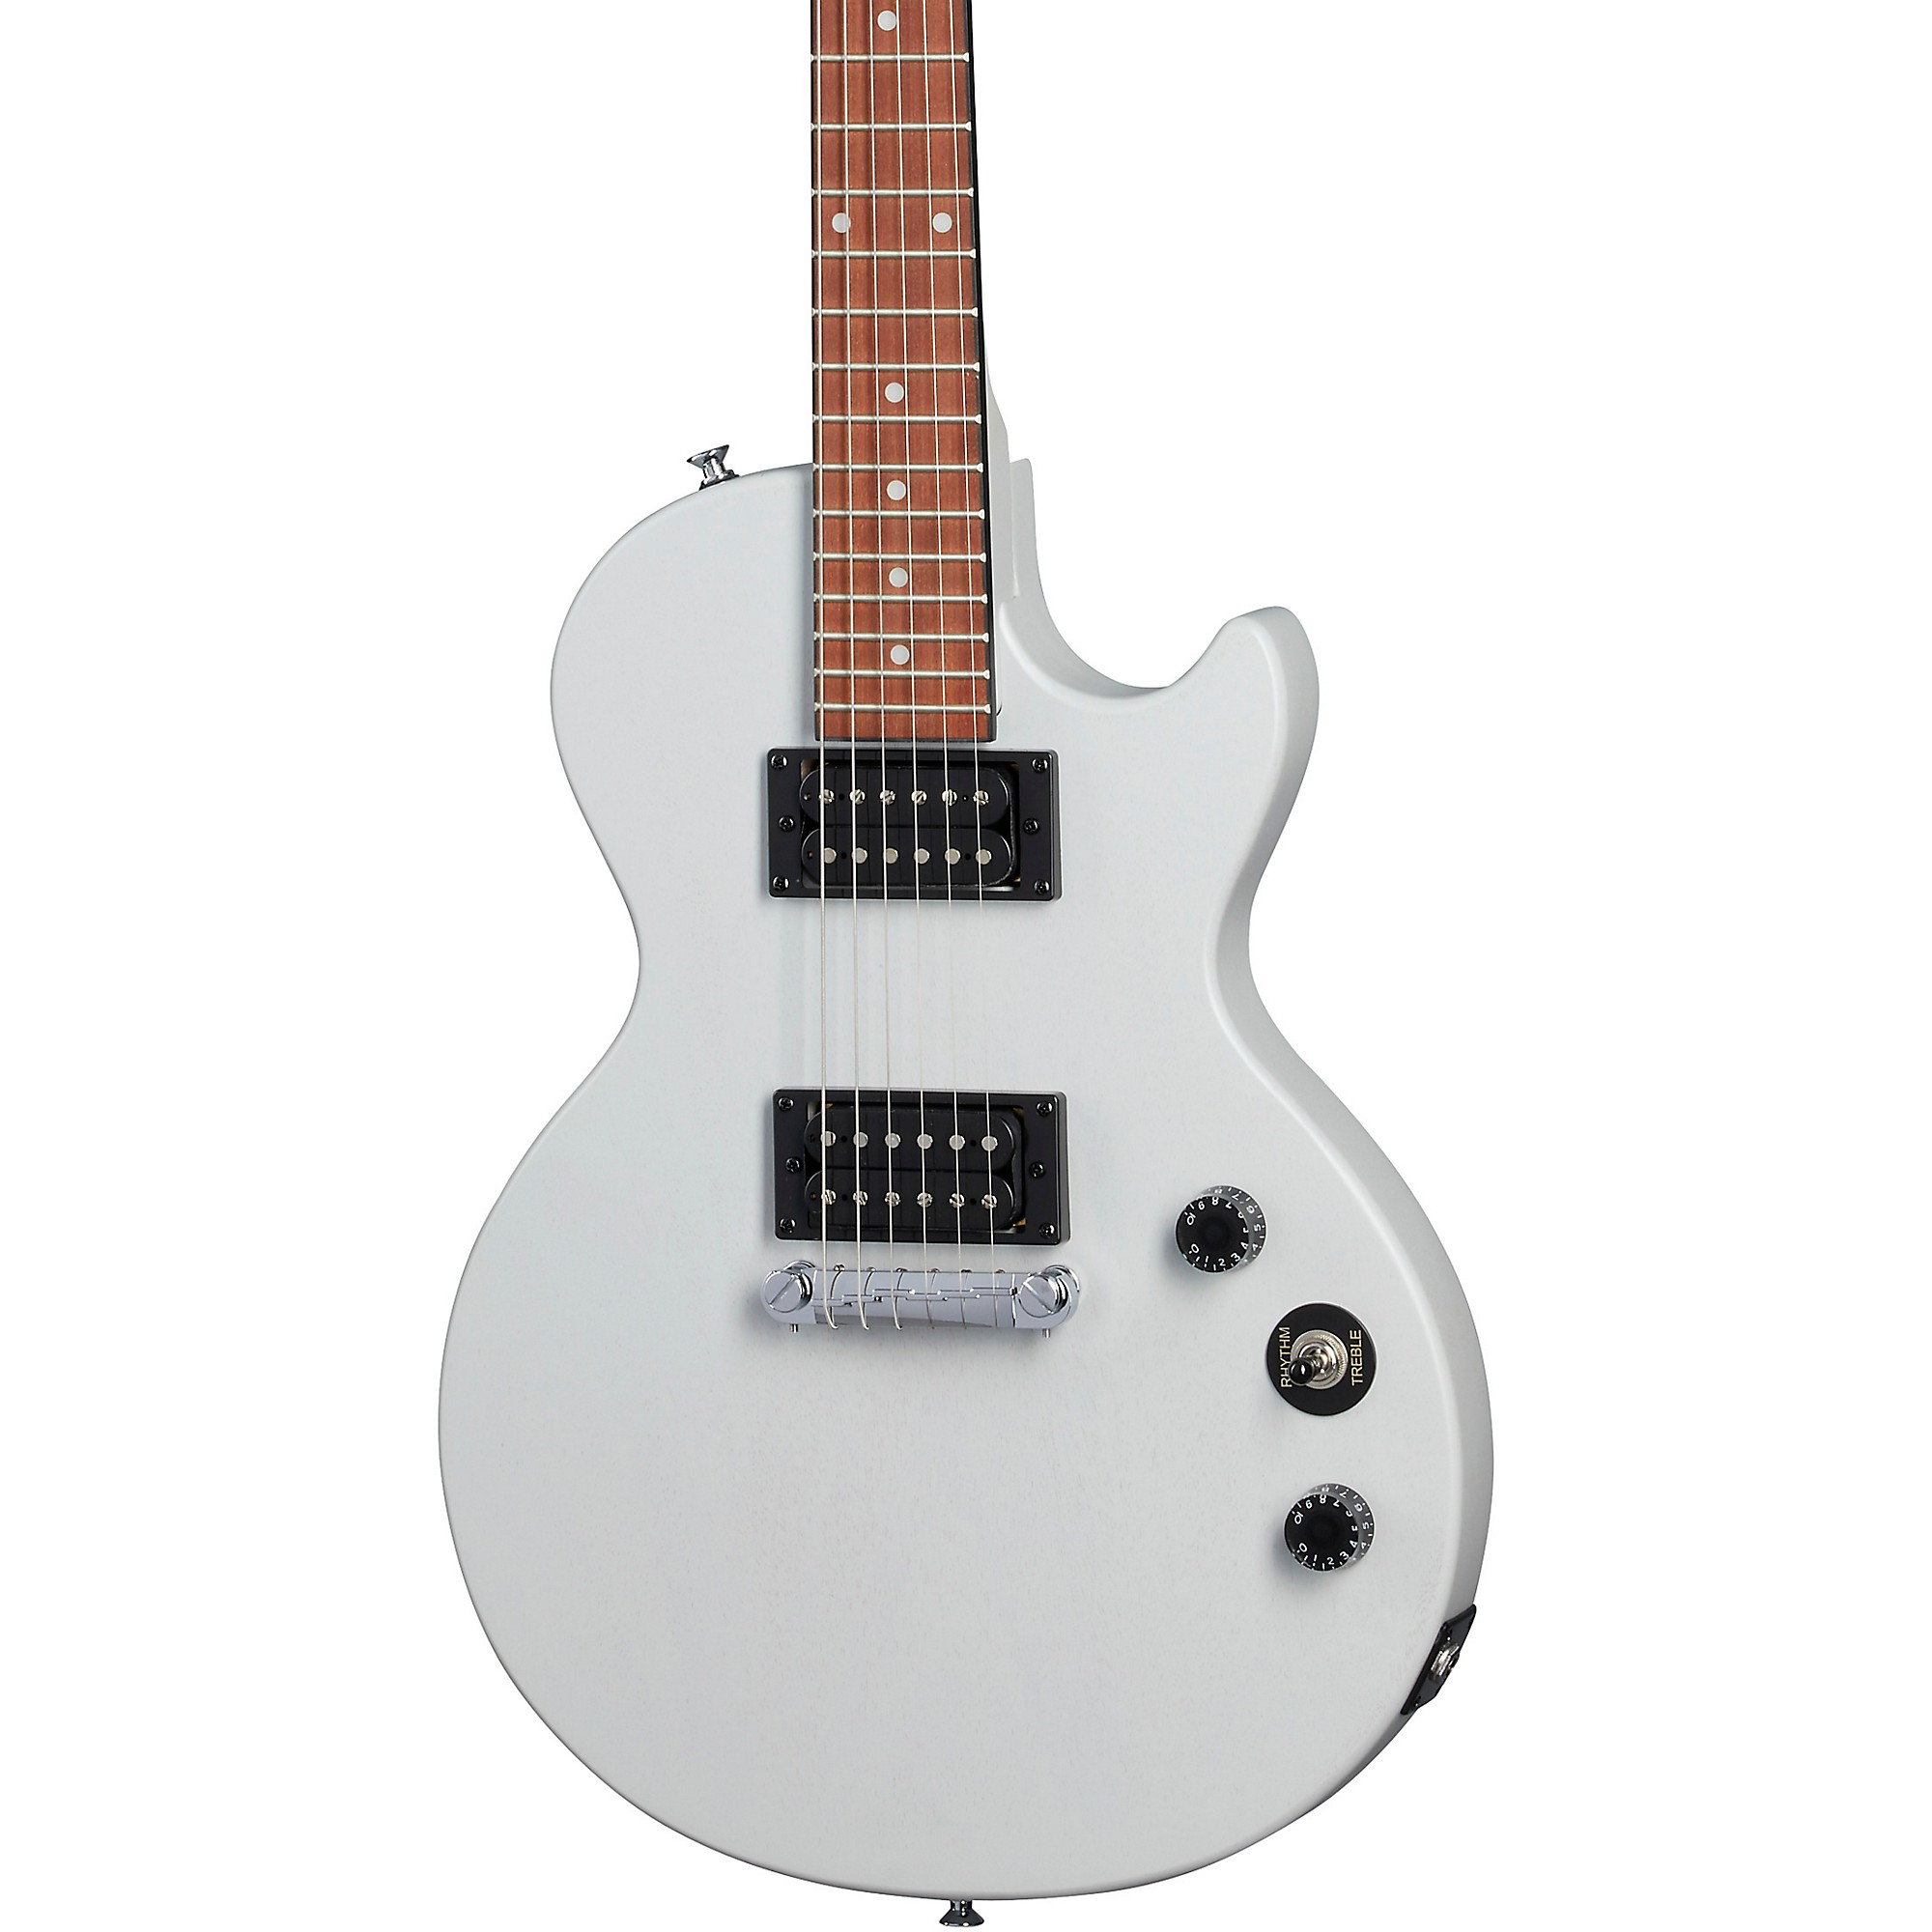 Epiphone Les Paul Special-I Limited-Edition Electric Guitar Worn Gray |  Guitar Center